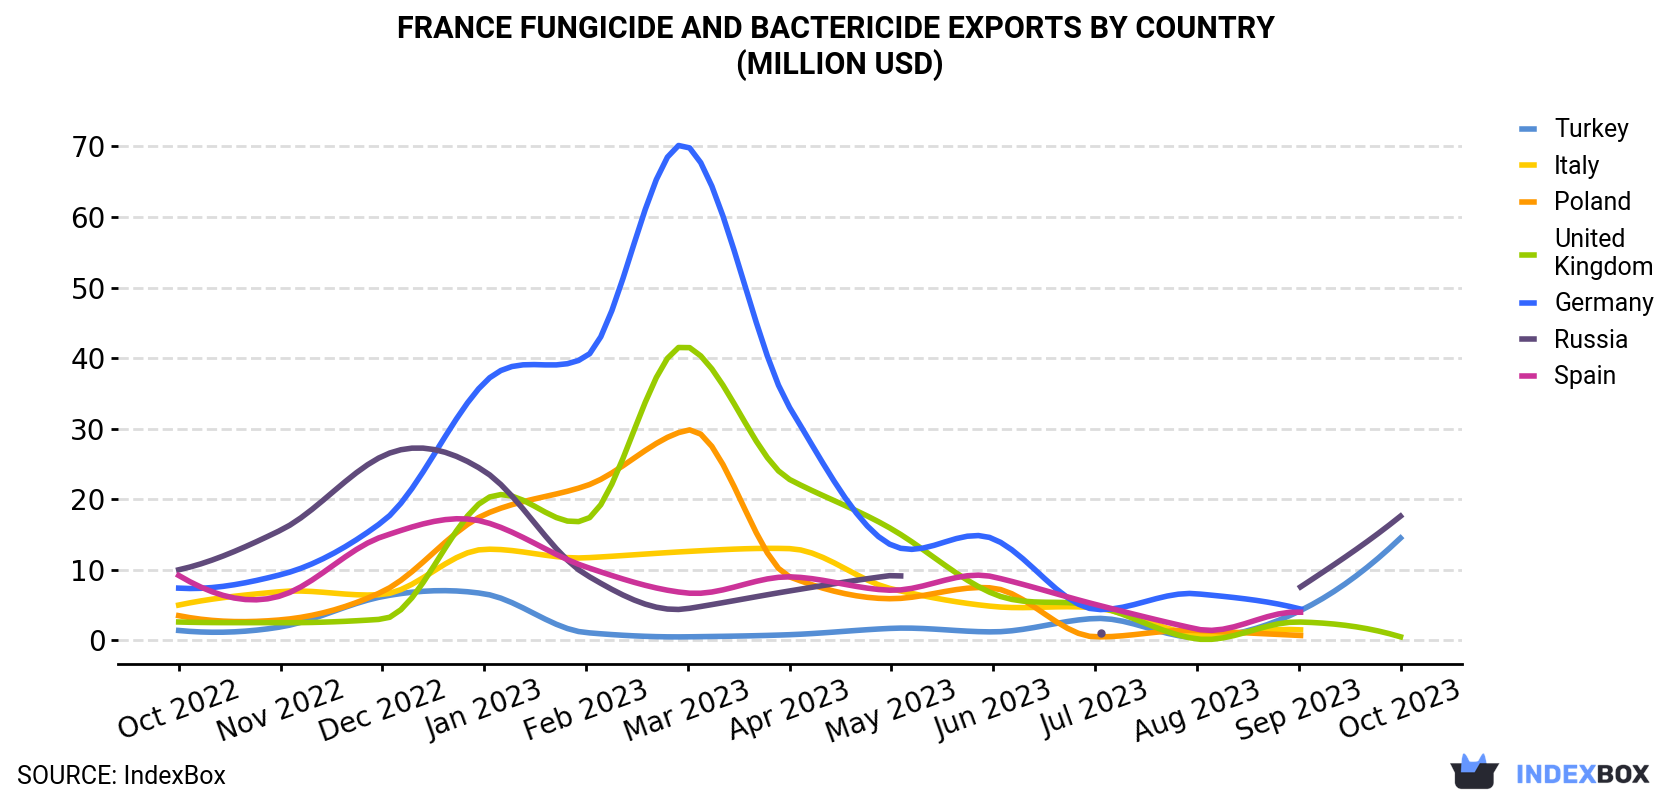 France Fungicide And Bactericide Exports By Country (Million USD)